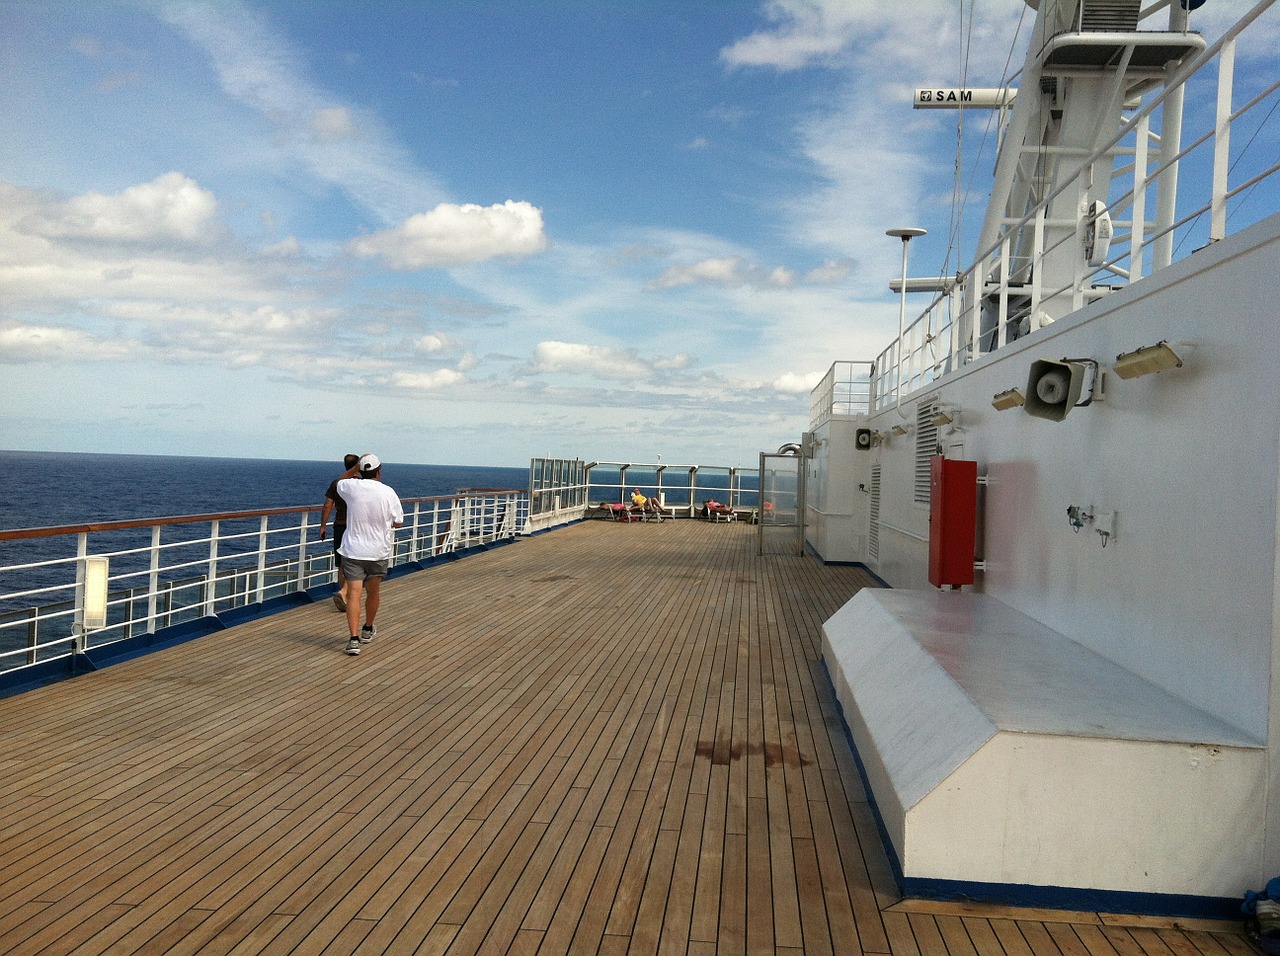 carnival cruise deck vacation free photo